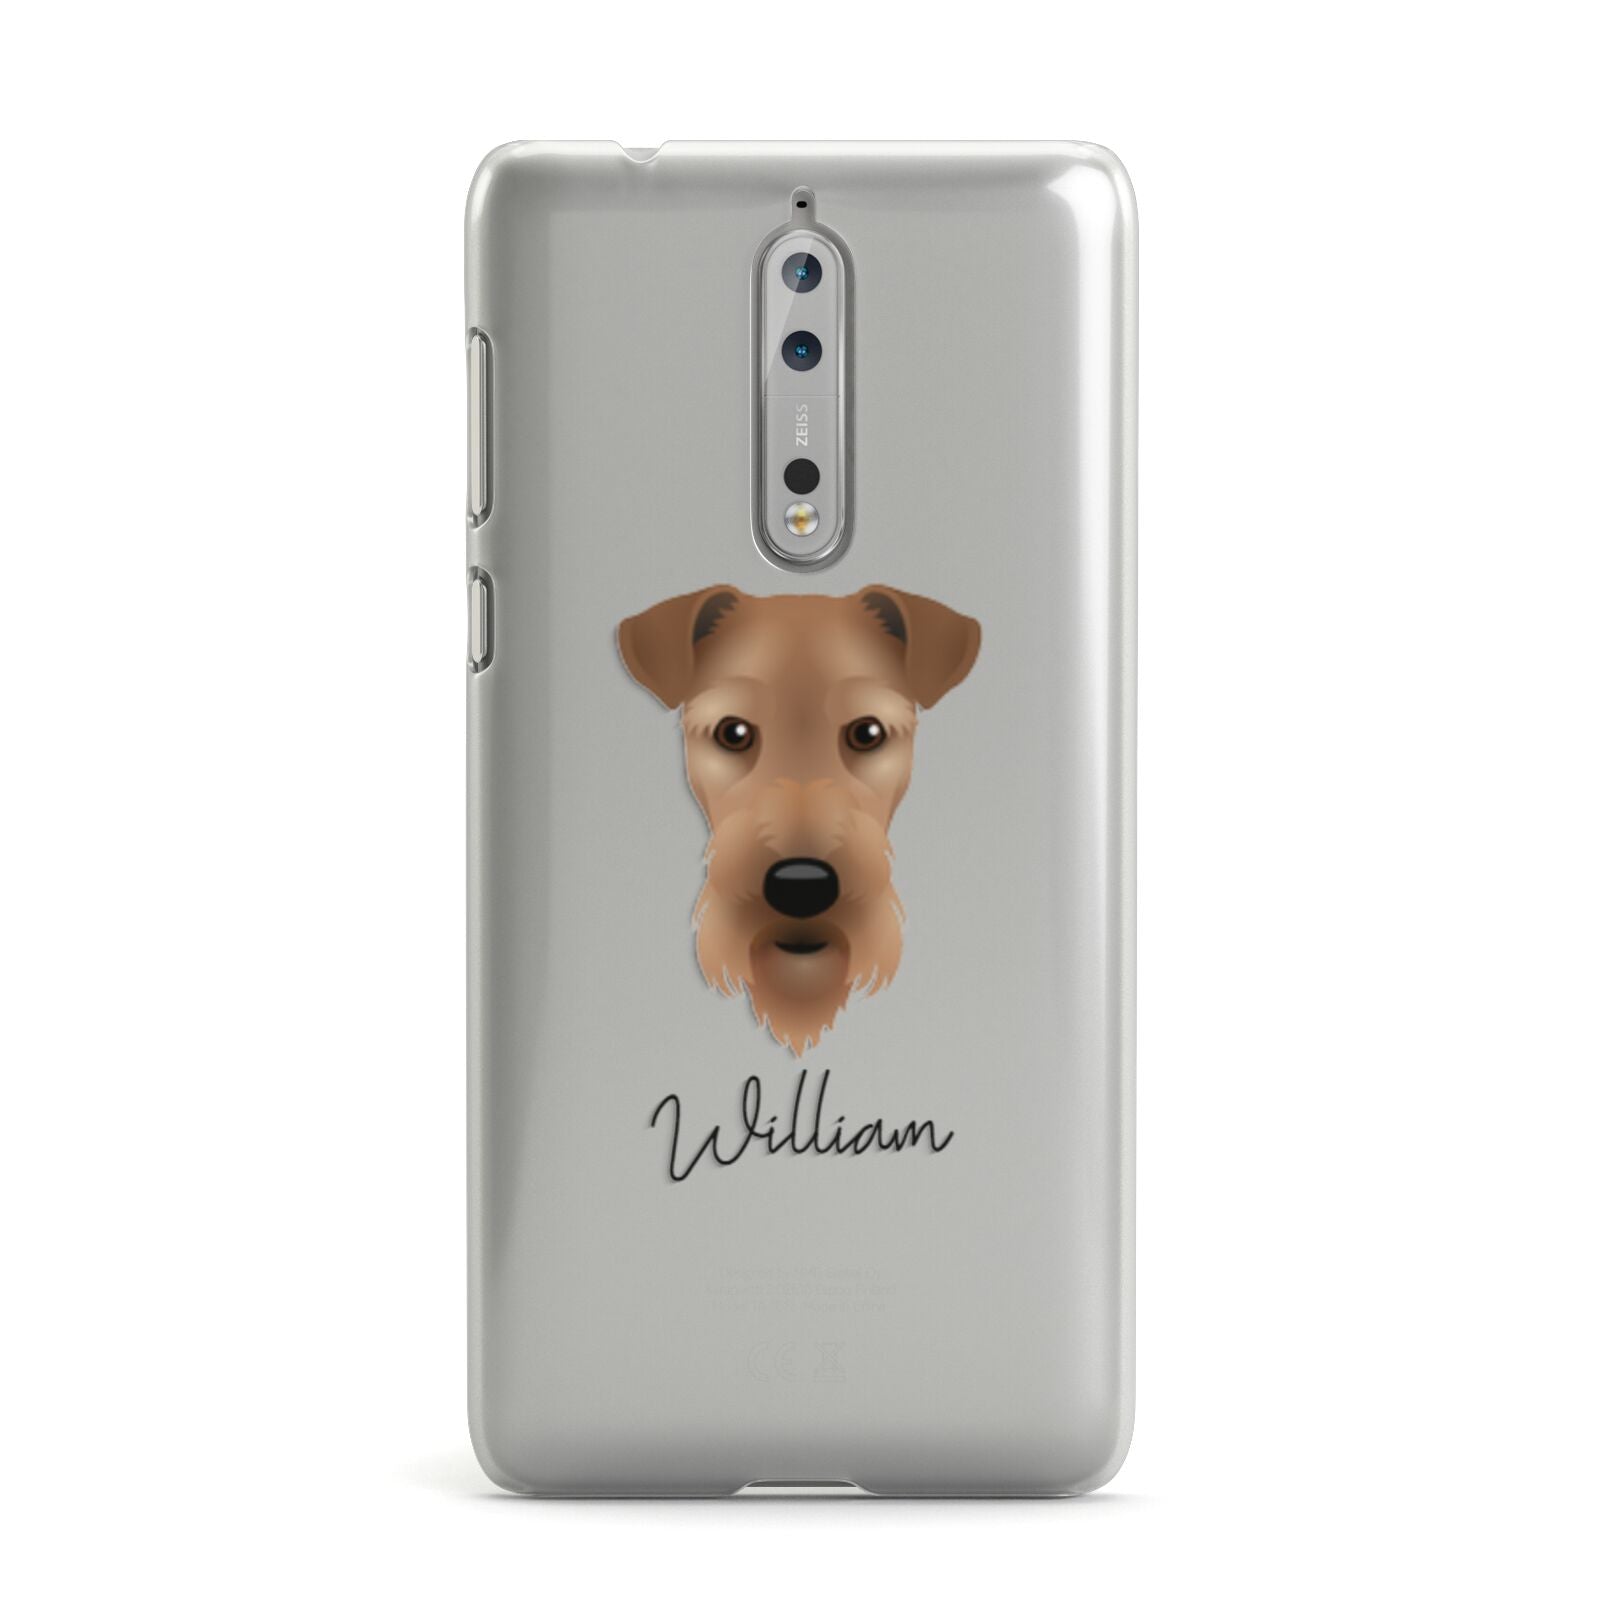 Airedale Terrier Personalised Nokia Case